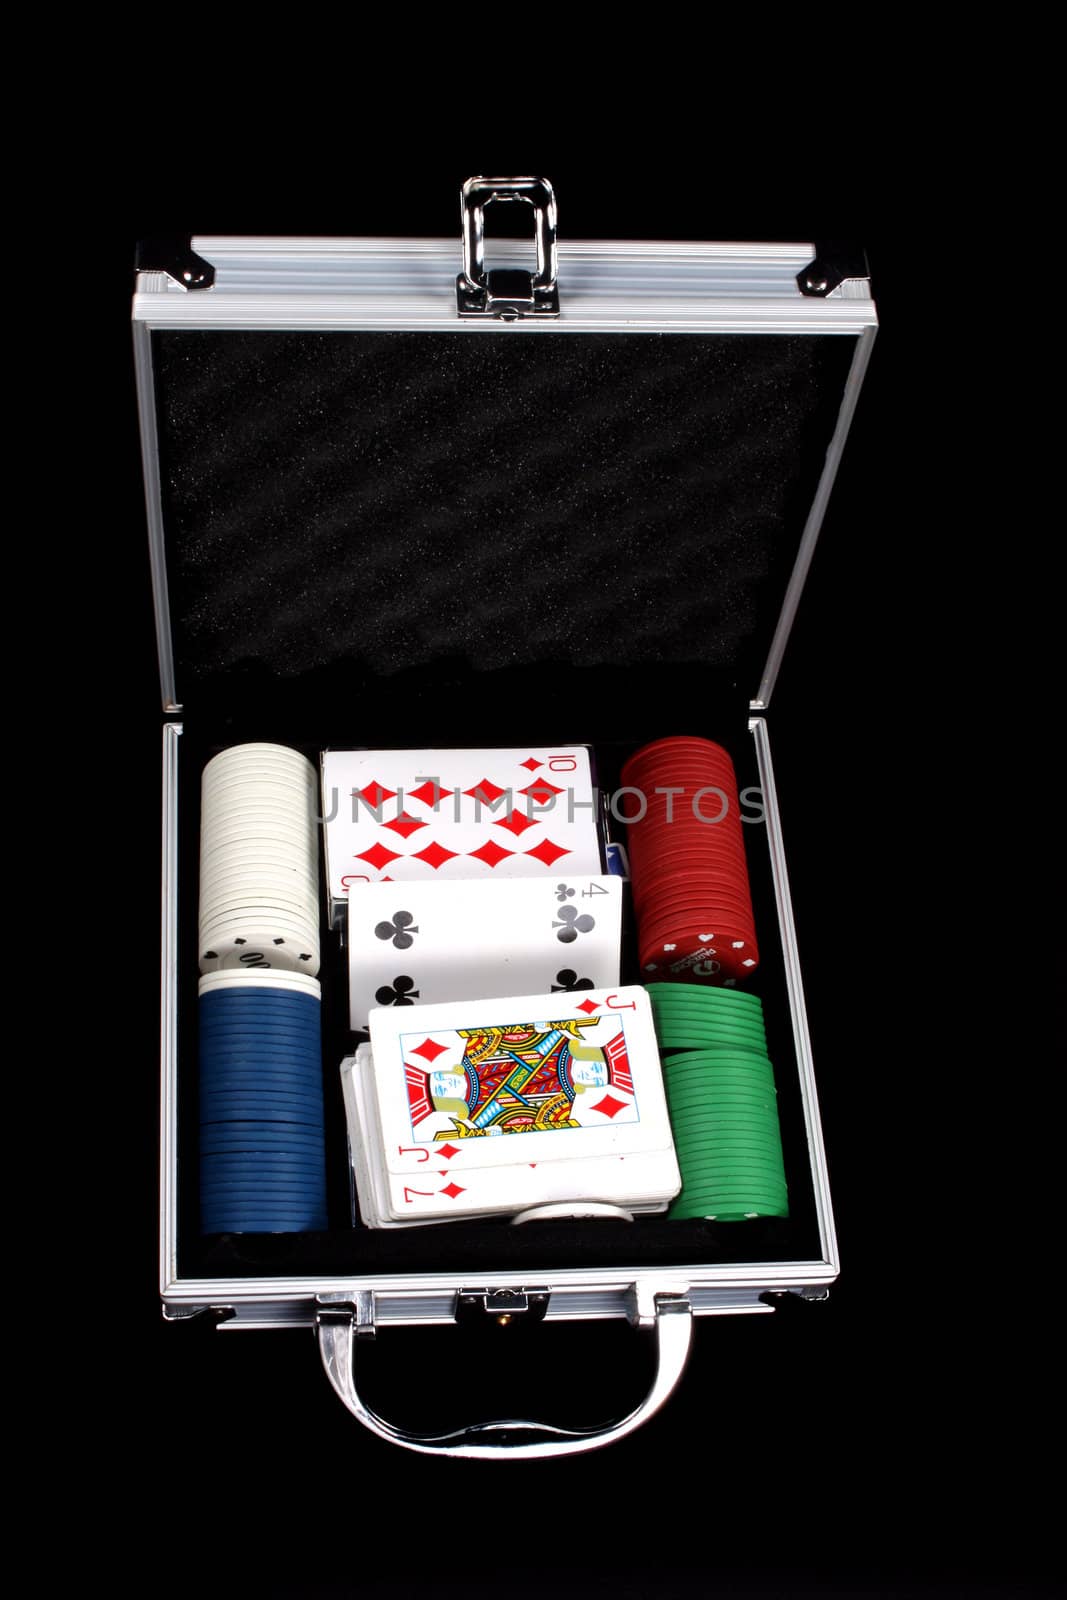 A silver casino box containing cards, counters and dices, isolated on black background.